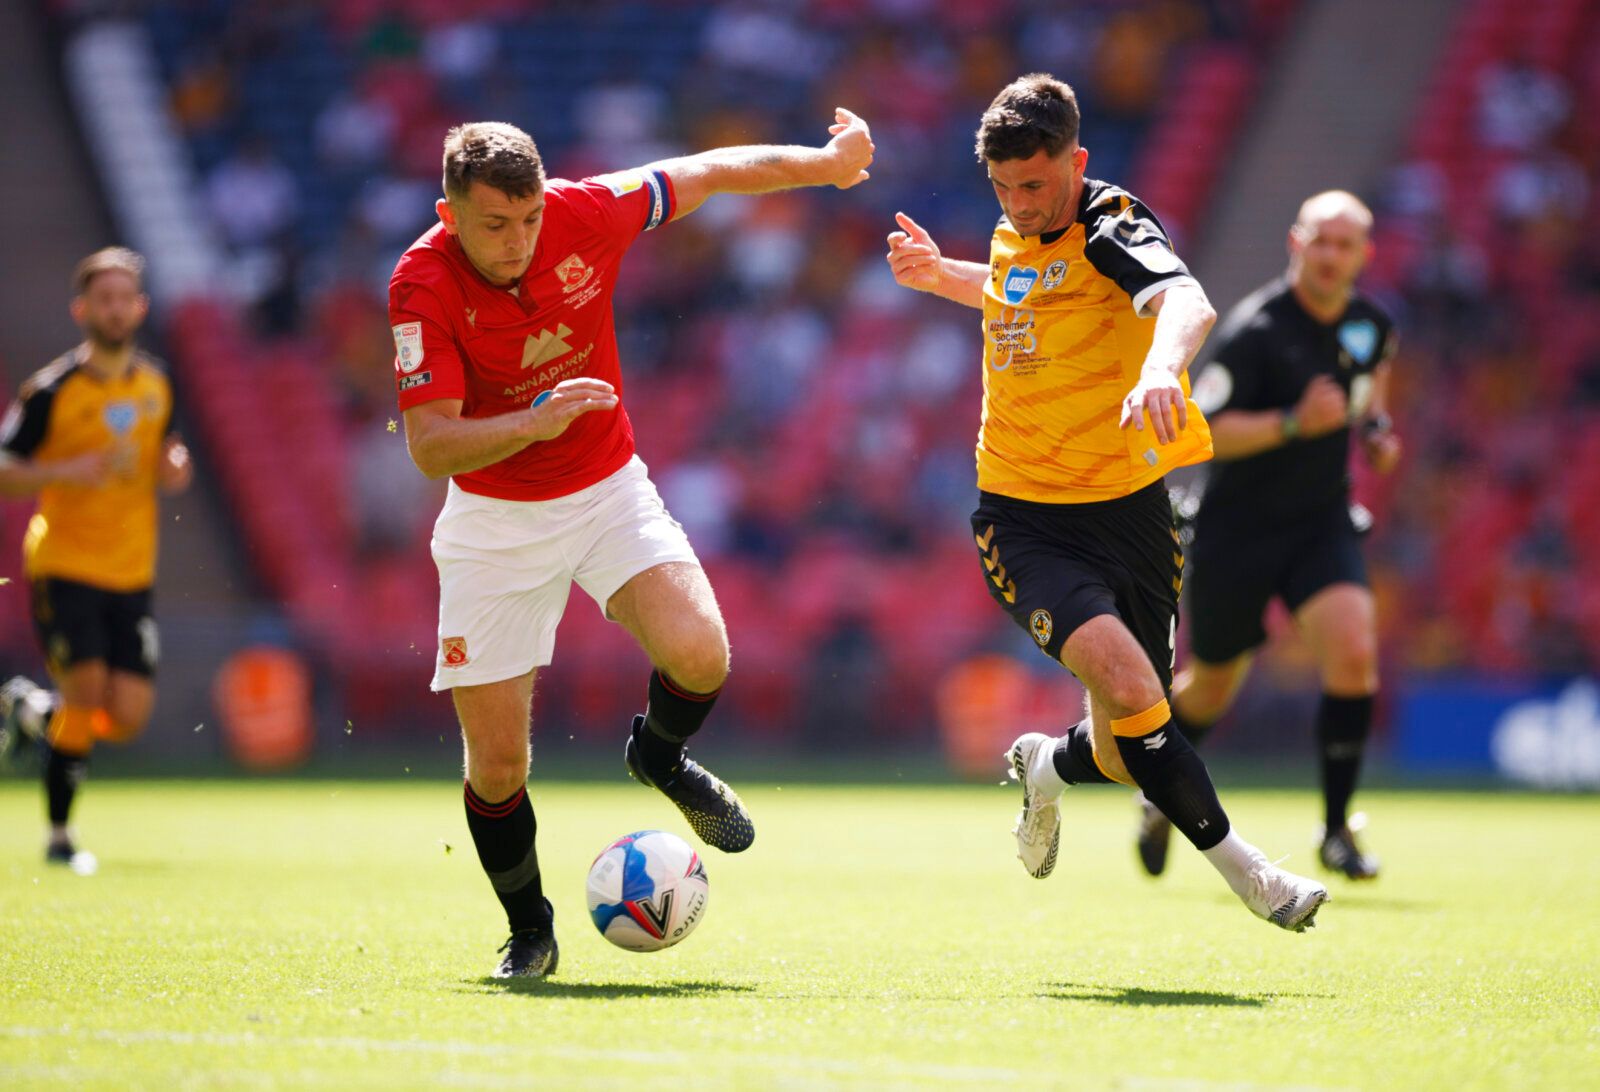 Soccer Football - League Two Play-Off Final - Morecambe v Newport County - Wembley Stadium, London, Britain - May 31, 2021 Morecambe's Sam Lavelle in action with Newport County's Padraig Amond Action Images/John Sibley EDITORIAL USE ONLY. No use with unauthorized audio, video, data, fixture lists, club/league logos or 'live' services. Online in-match use limited to 75 images, no video emulation. No use in betting, games or single club /league/player publications.  Please contact your account rep